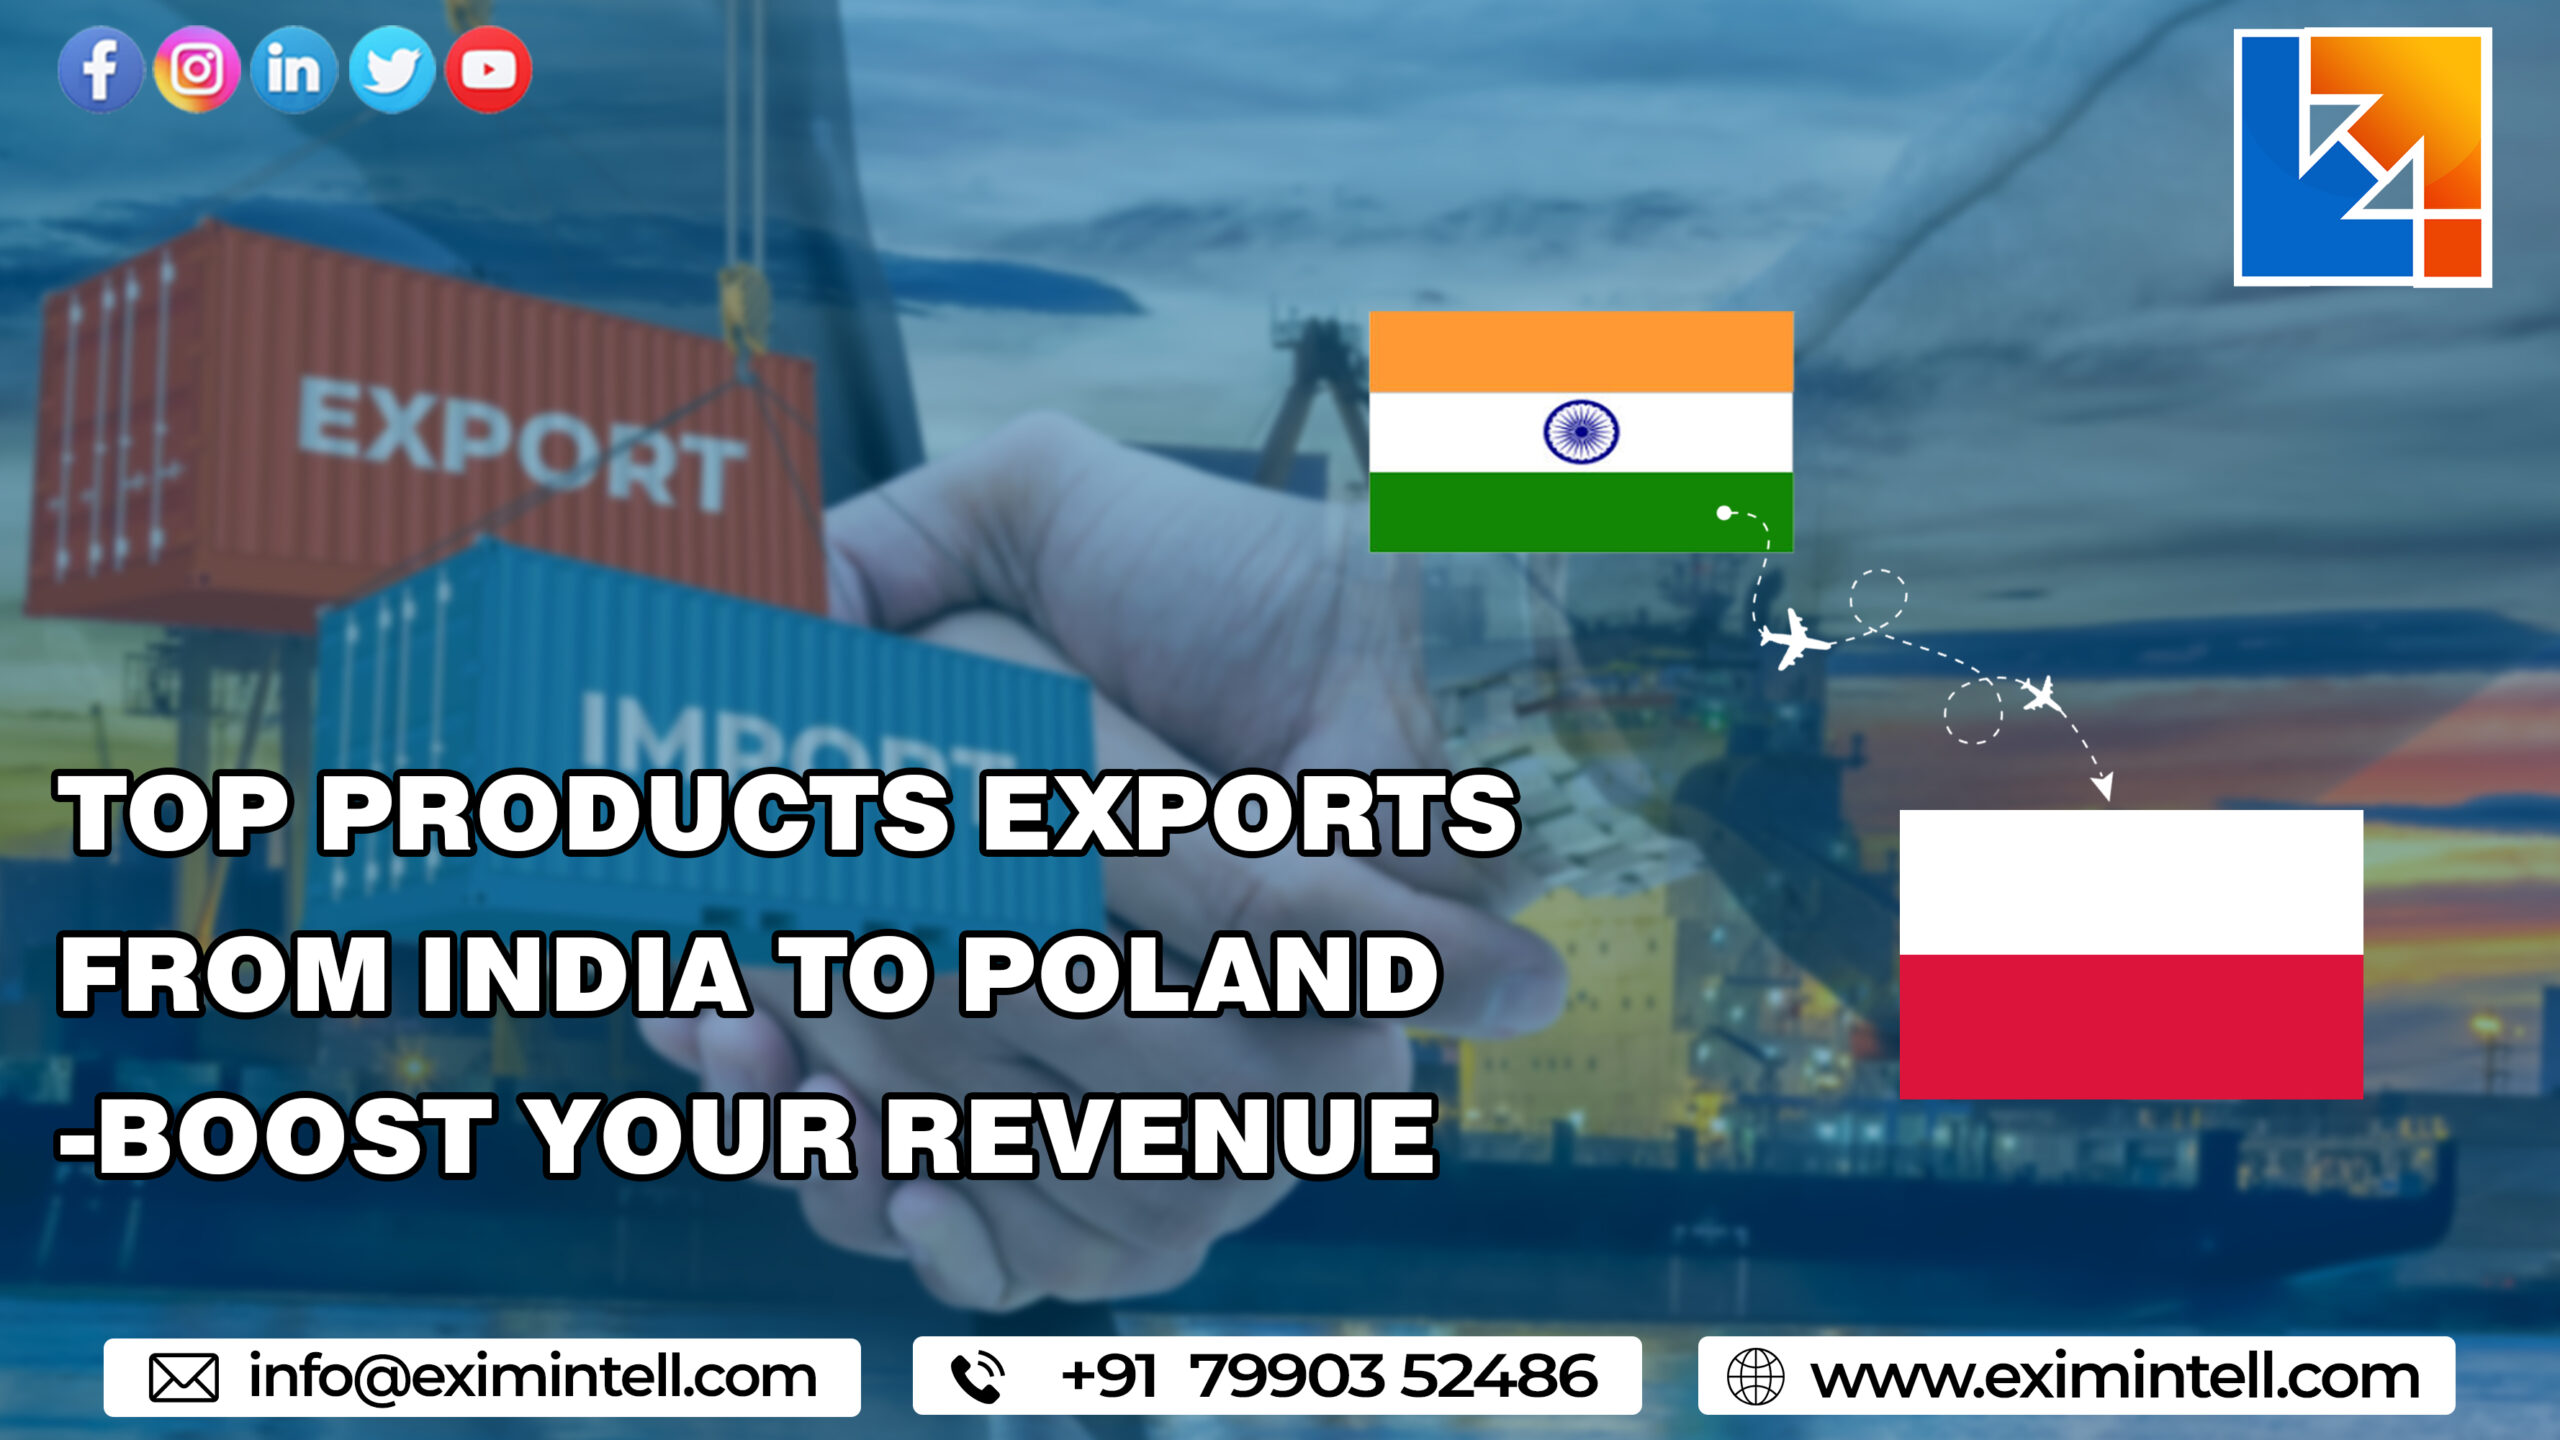 Top Products Exports From India to Poland-Boost Your Revenue